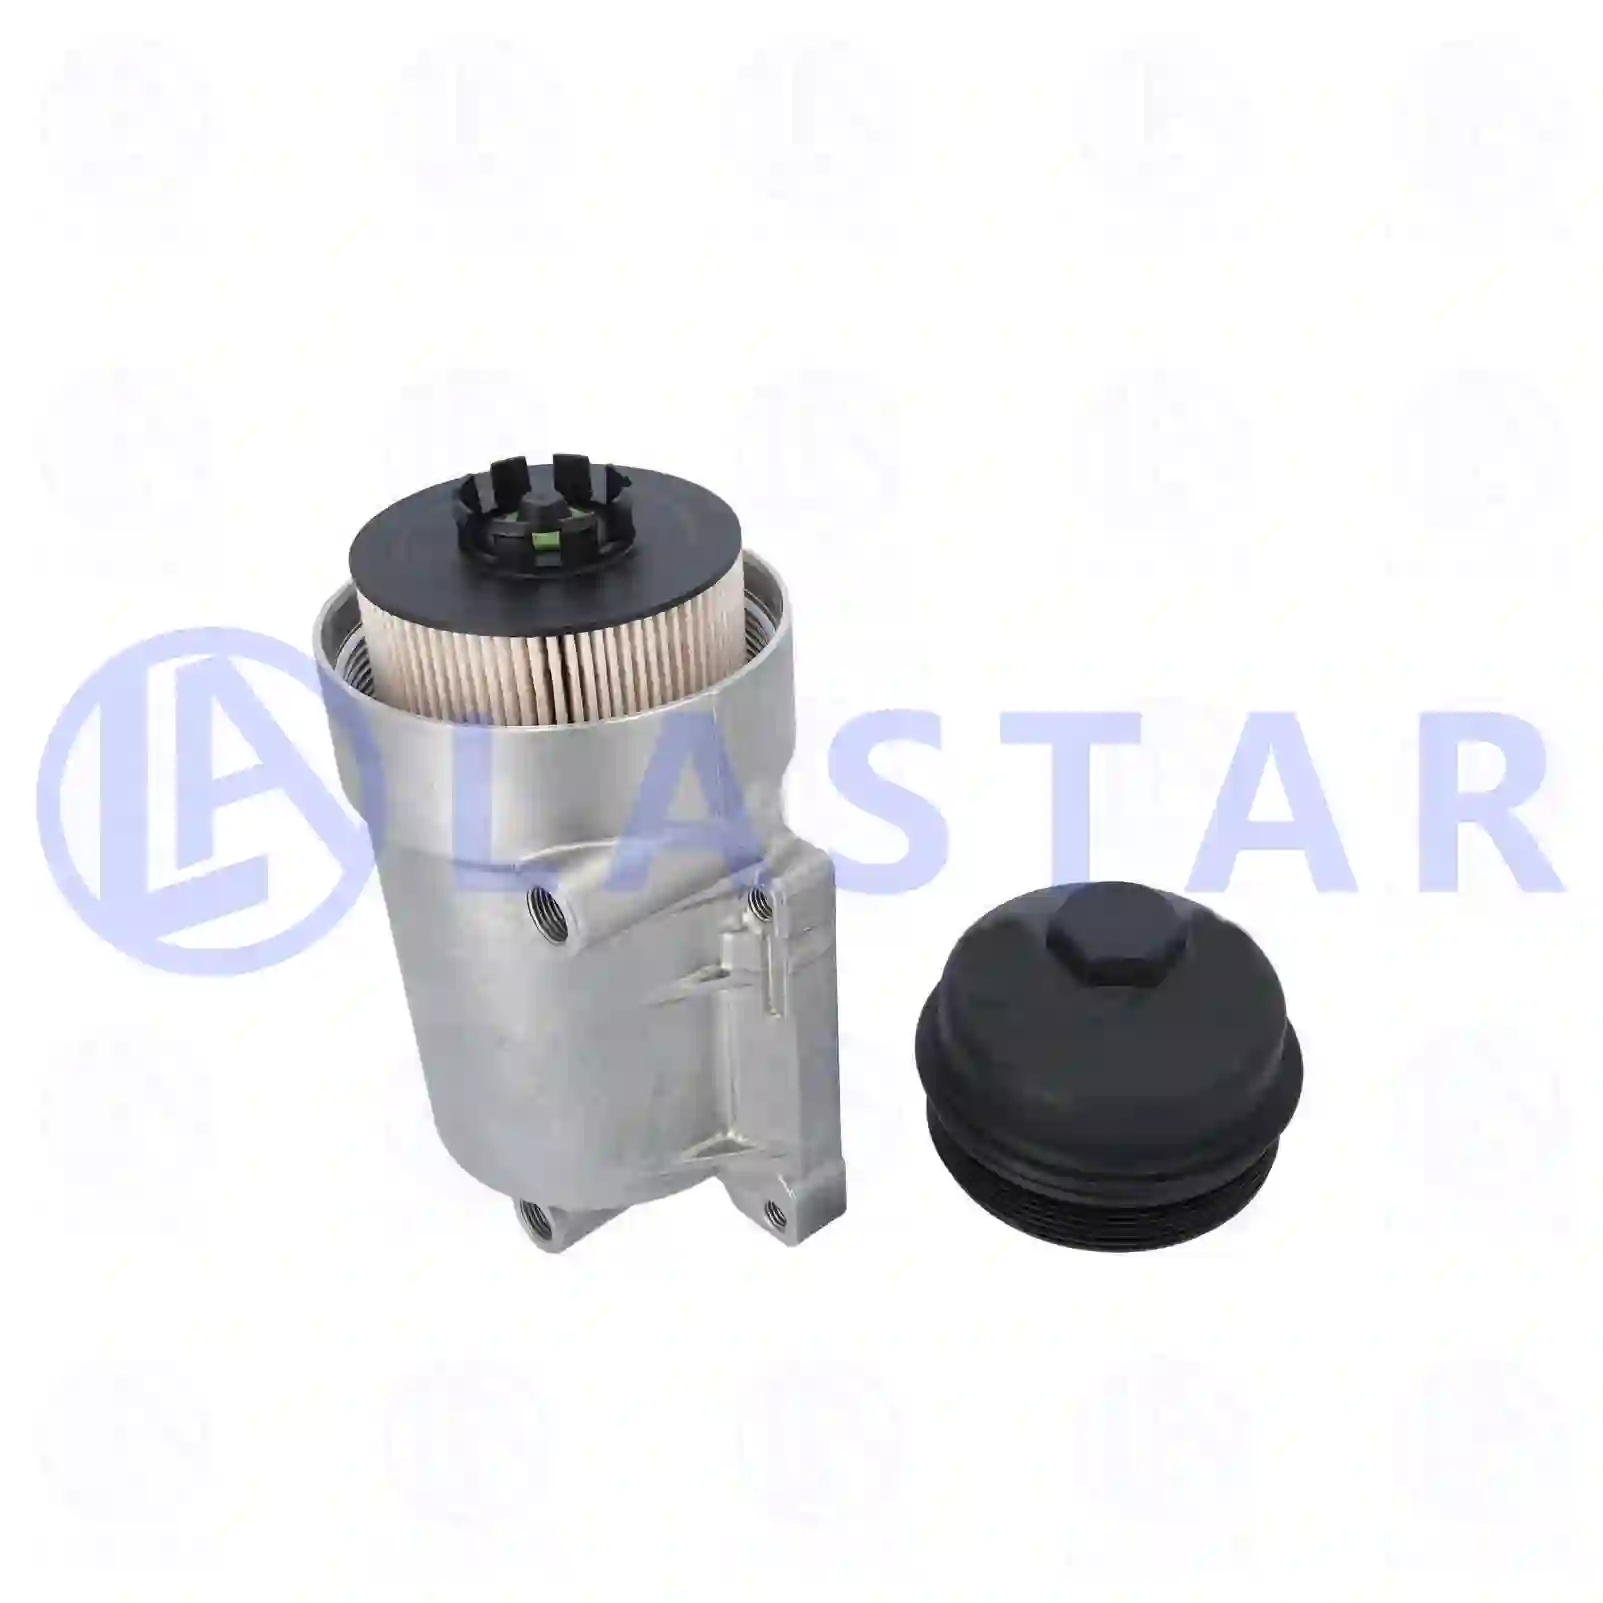  Fuel filter, complete, with filter || Lastar Spare Part | Truck Spare Parts, Auotomotive Spare Parts